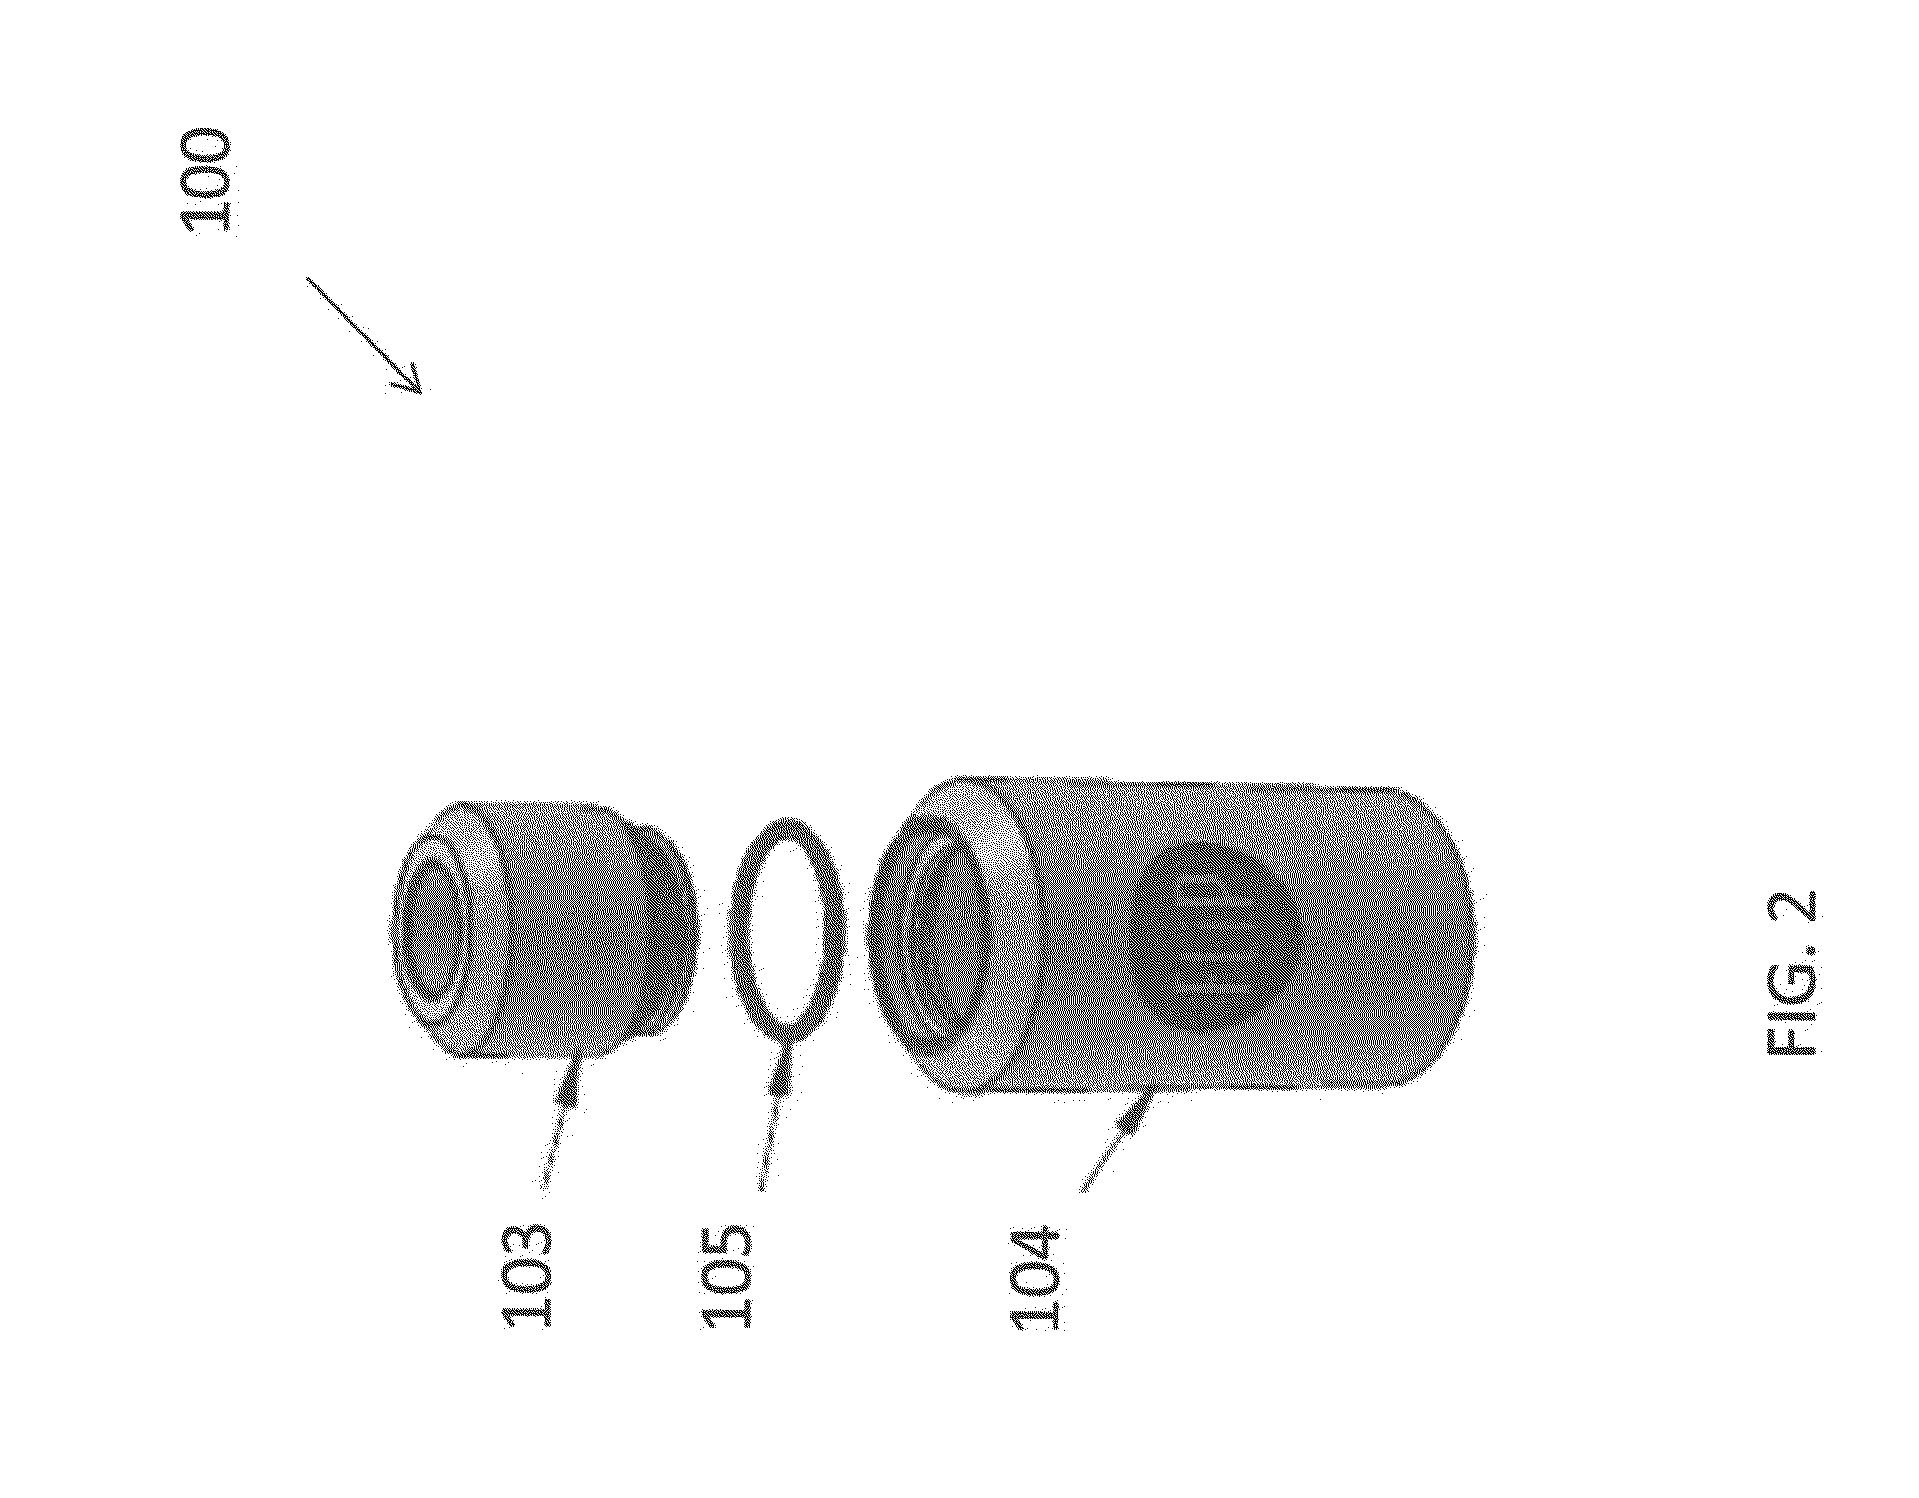 Enhanced Electronic Cigarette Assembly With Modular Disposable Elements Including Tanks